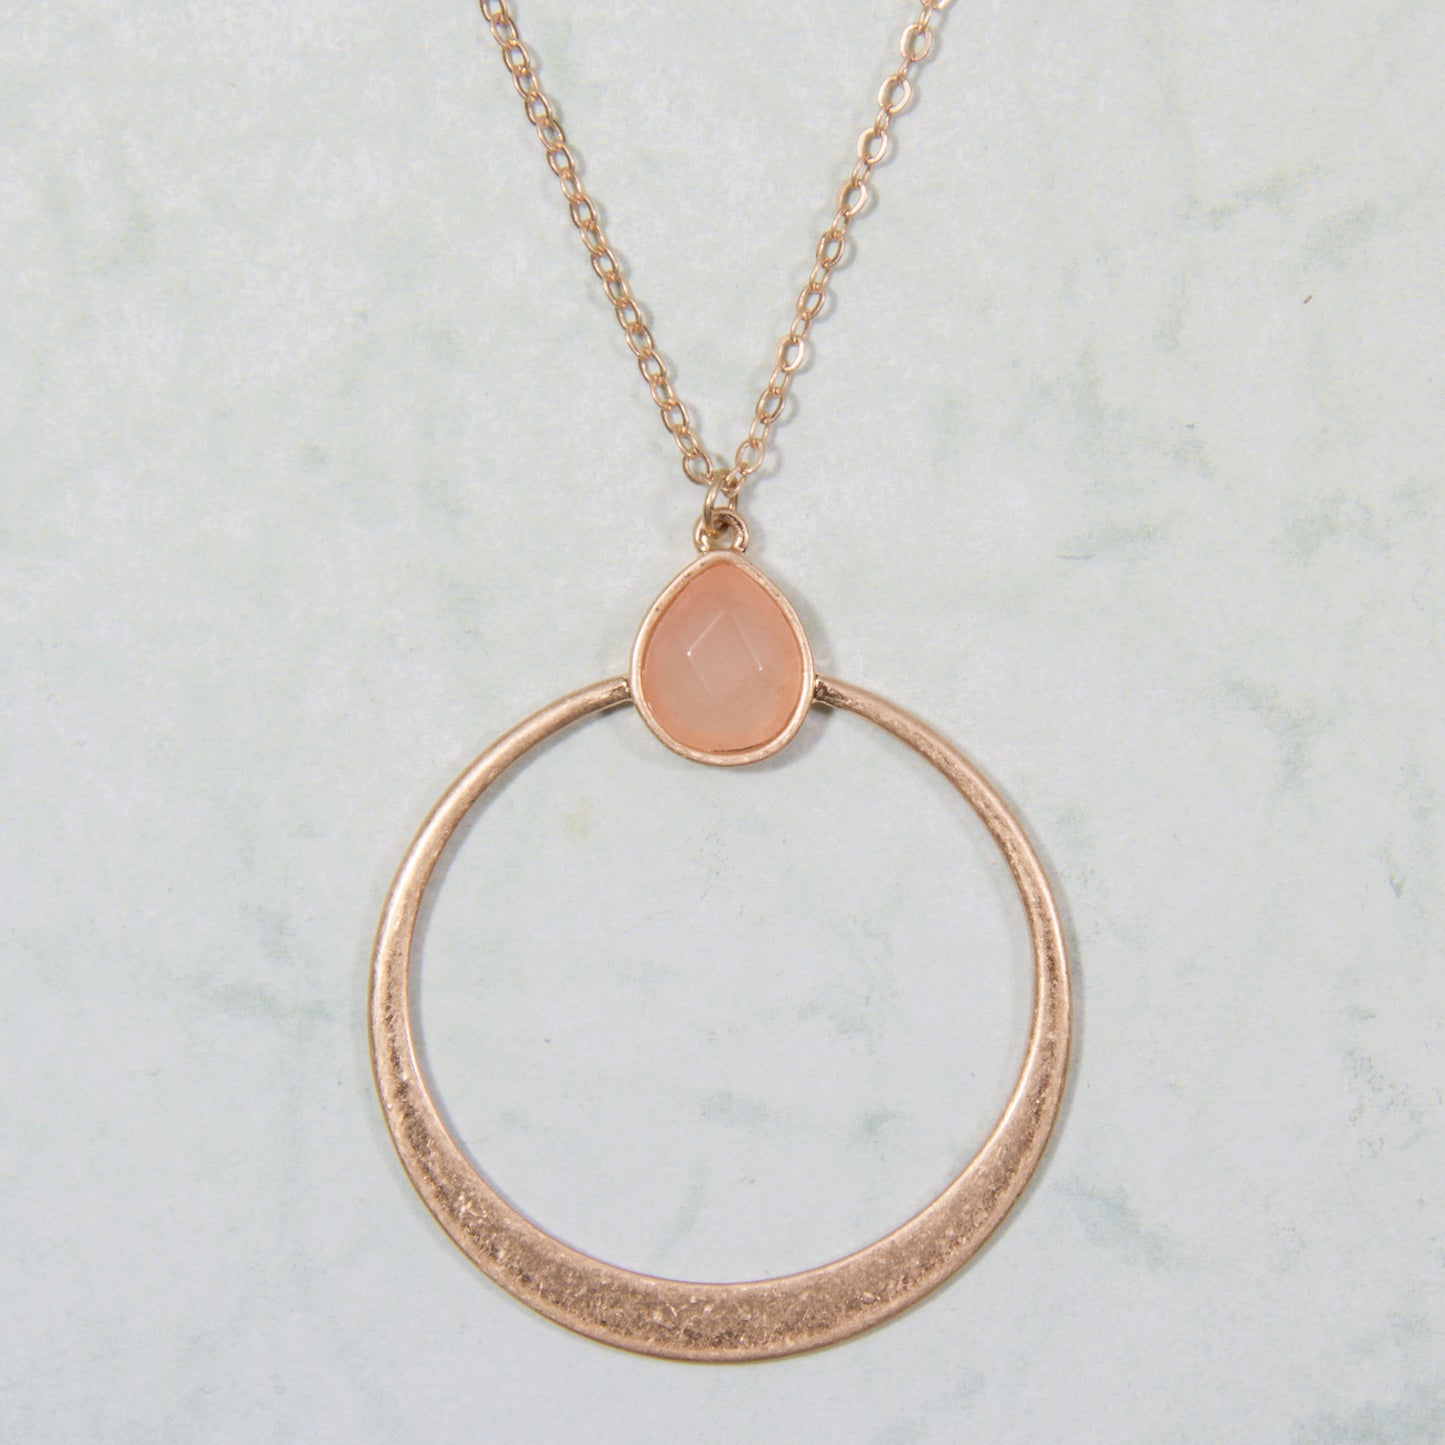 N3299-PK 32" Open Circle Pendant with Pink Stone